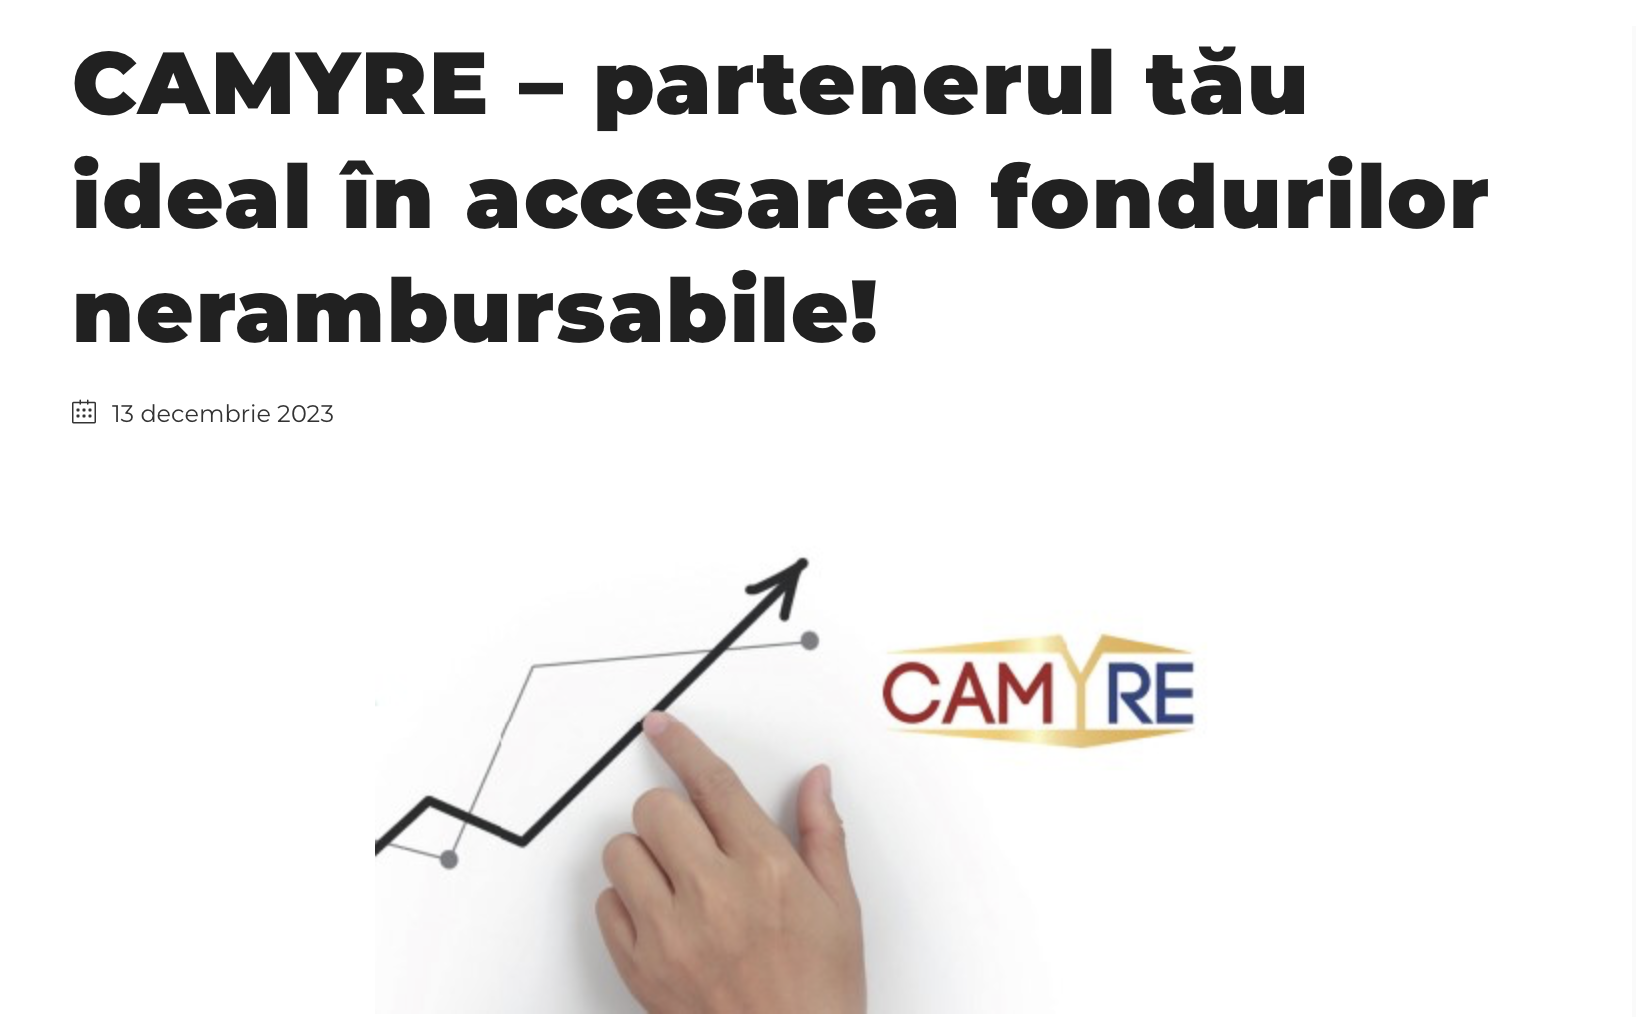 Camyre